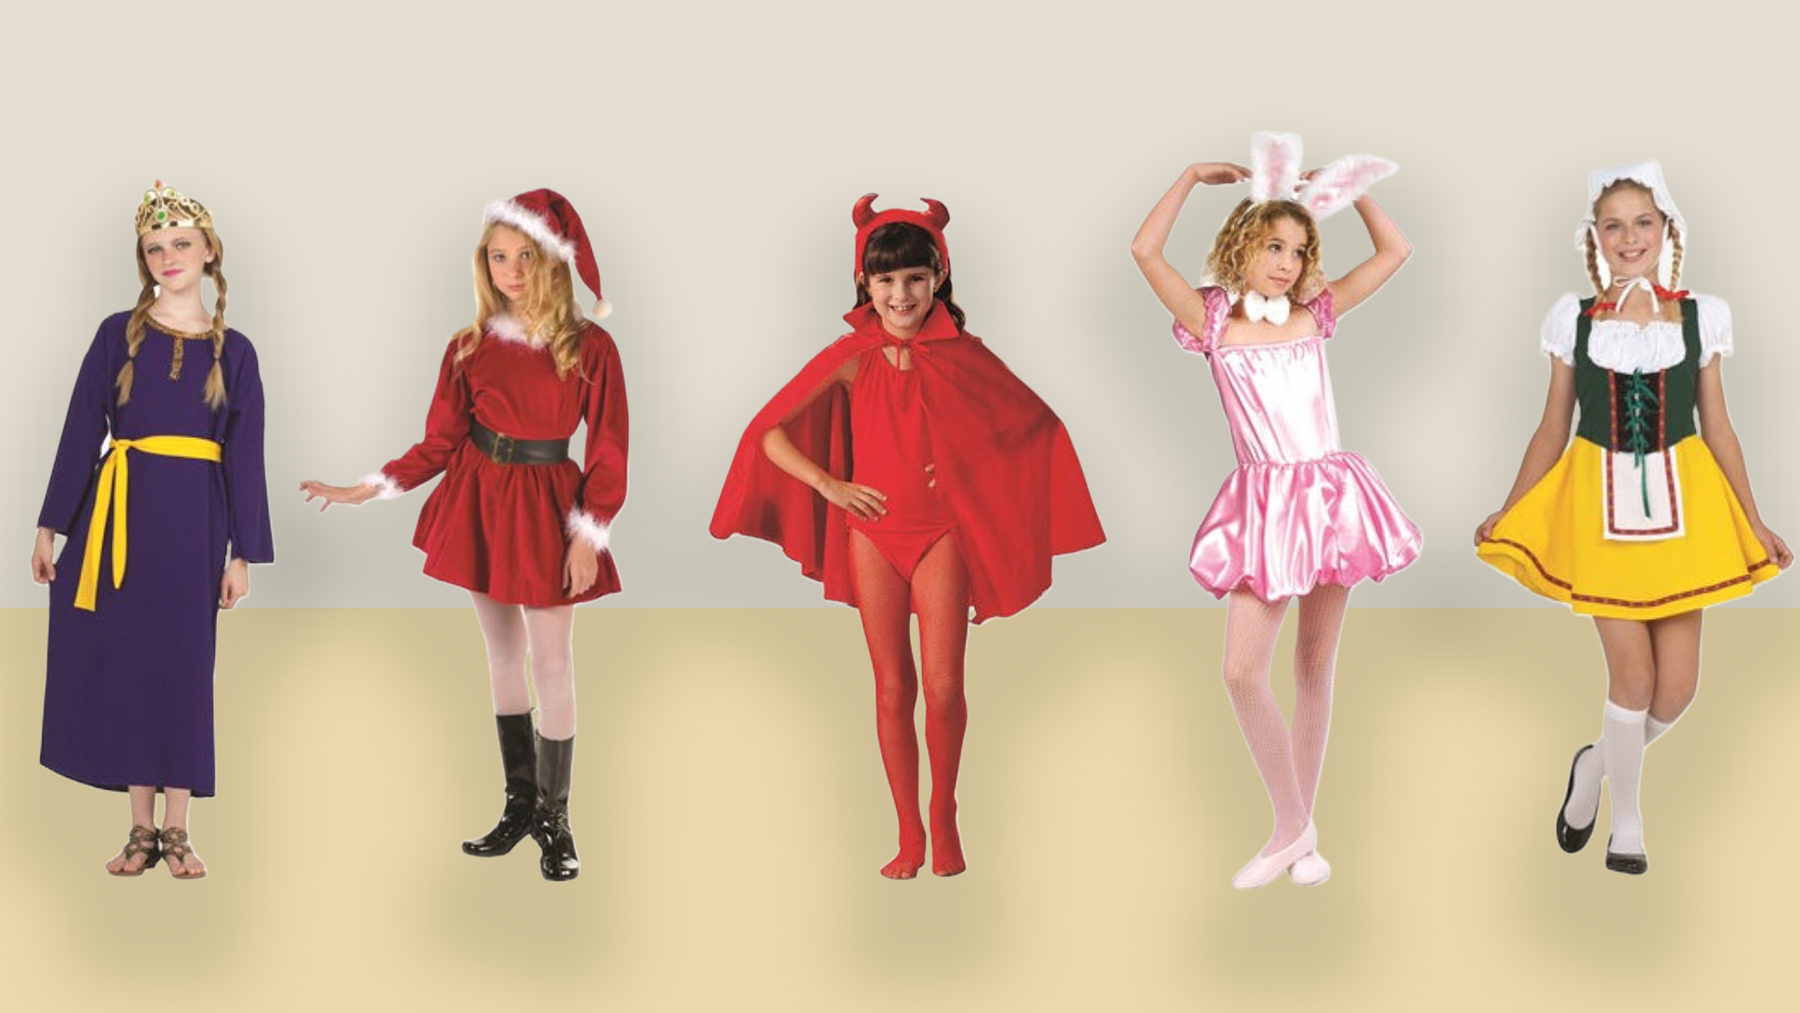 5 Adorable Girl's Costumes That Will Take Your Child's Imagination to The Next Level